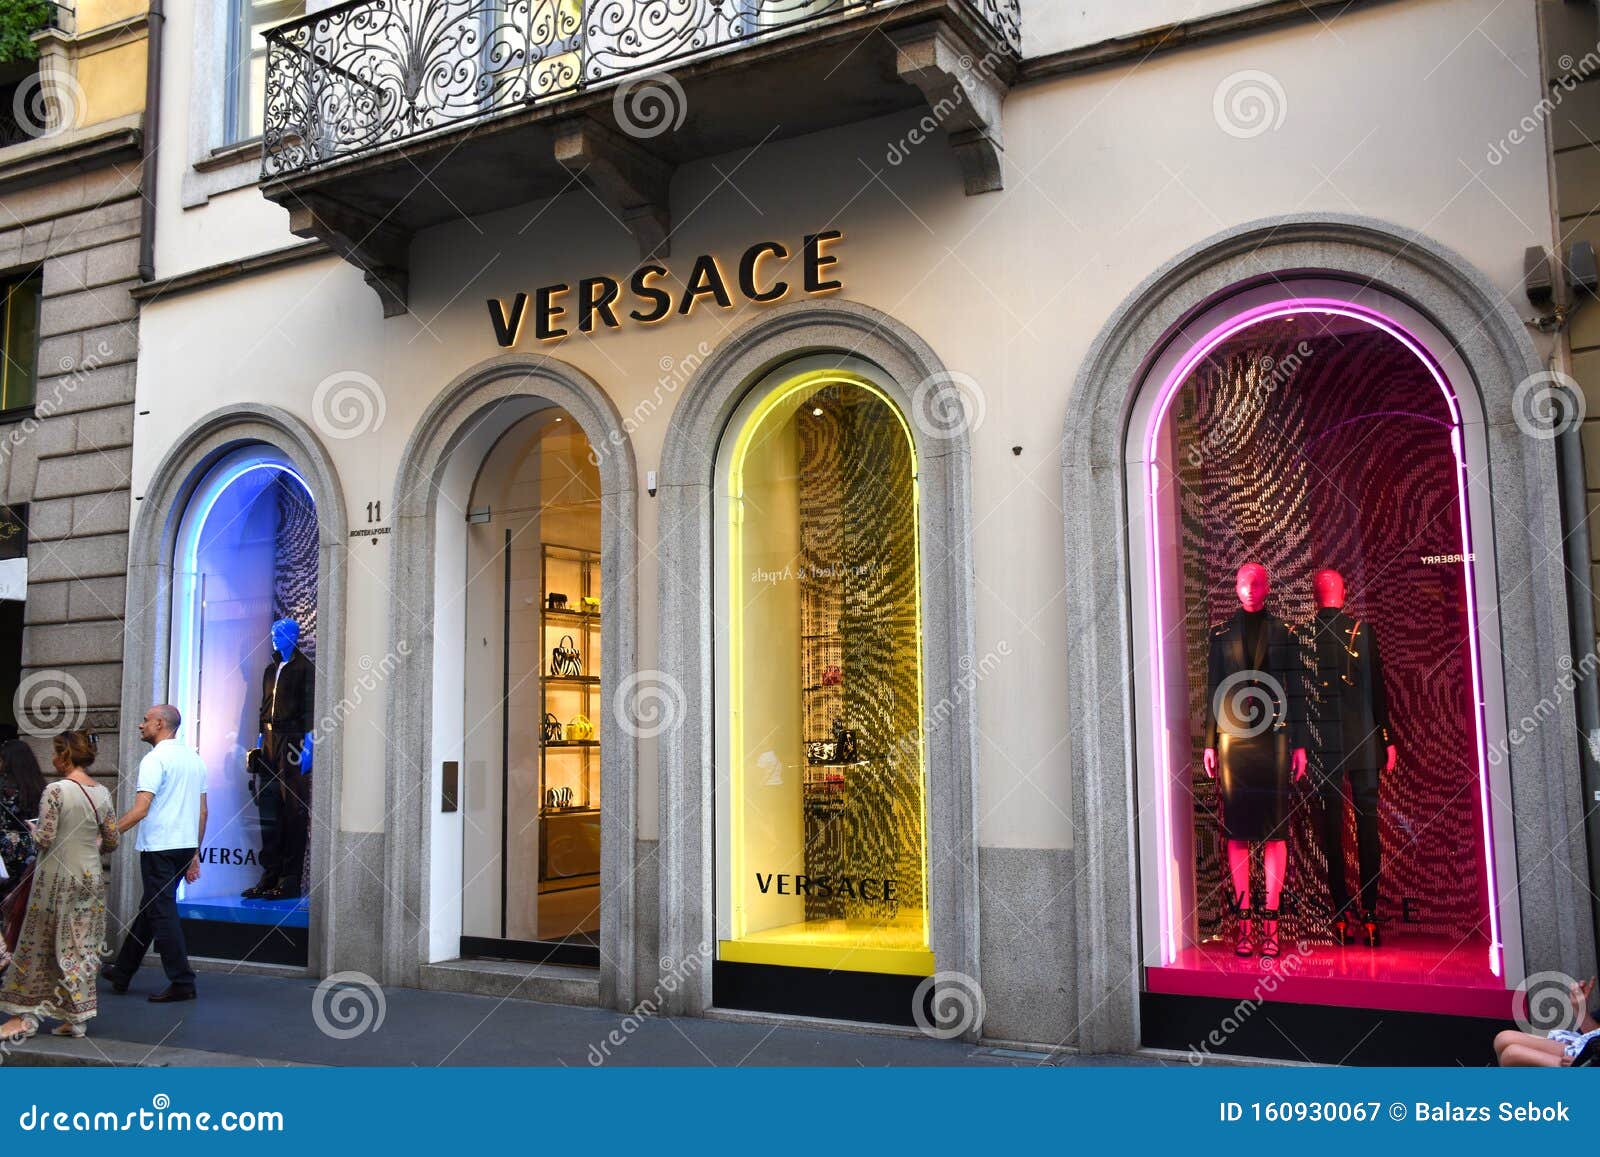 Versace Store Facade and Displays in the Fashion District of Milan ...